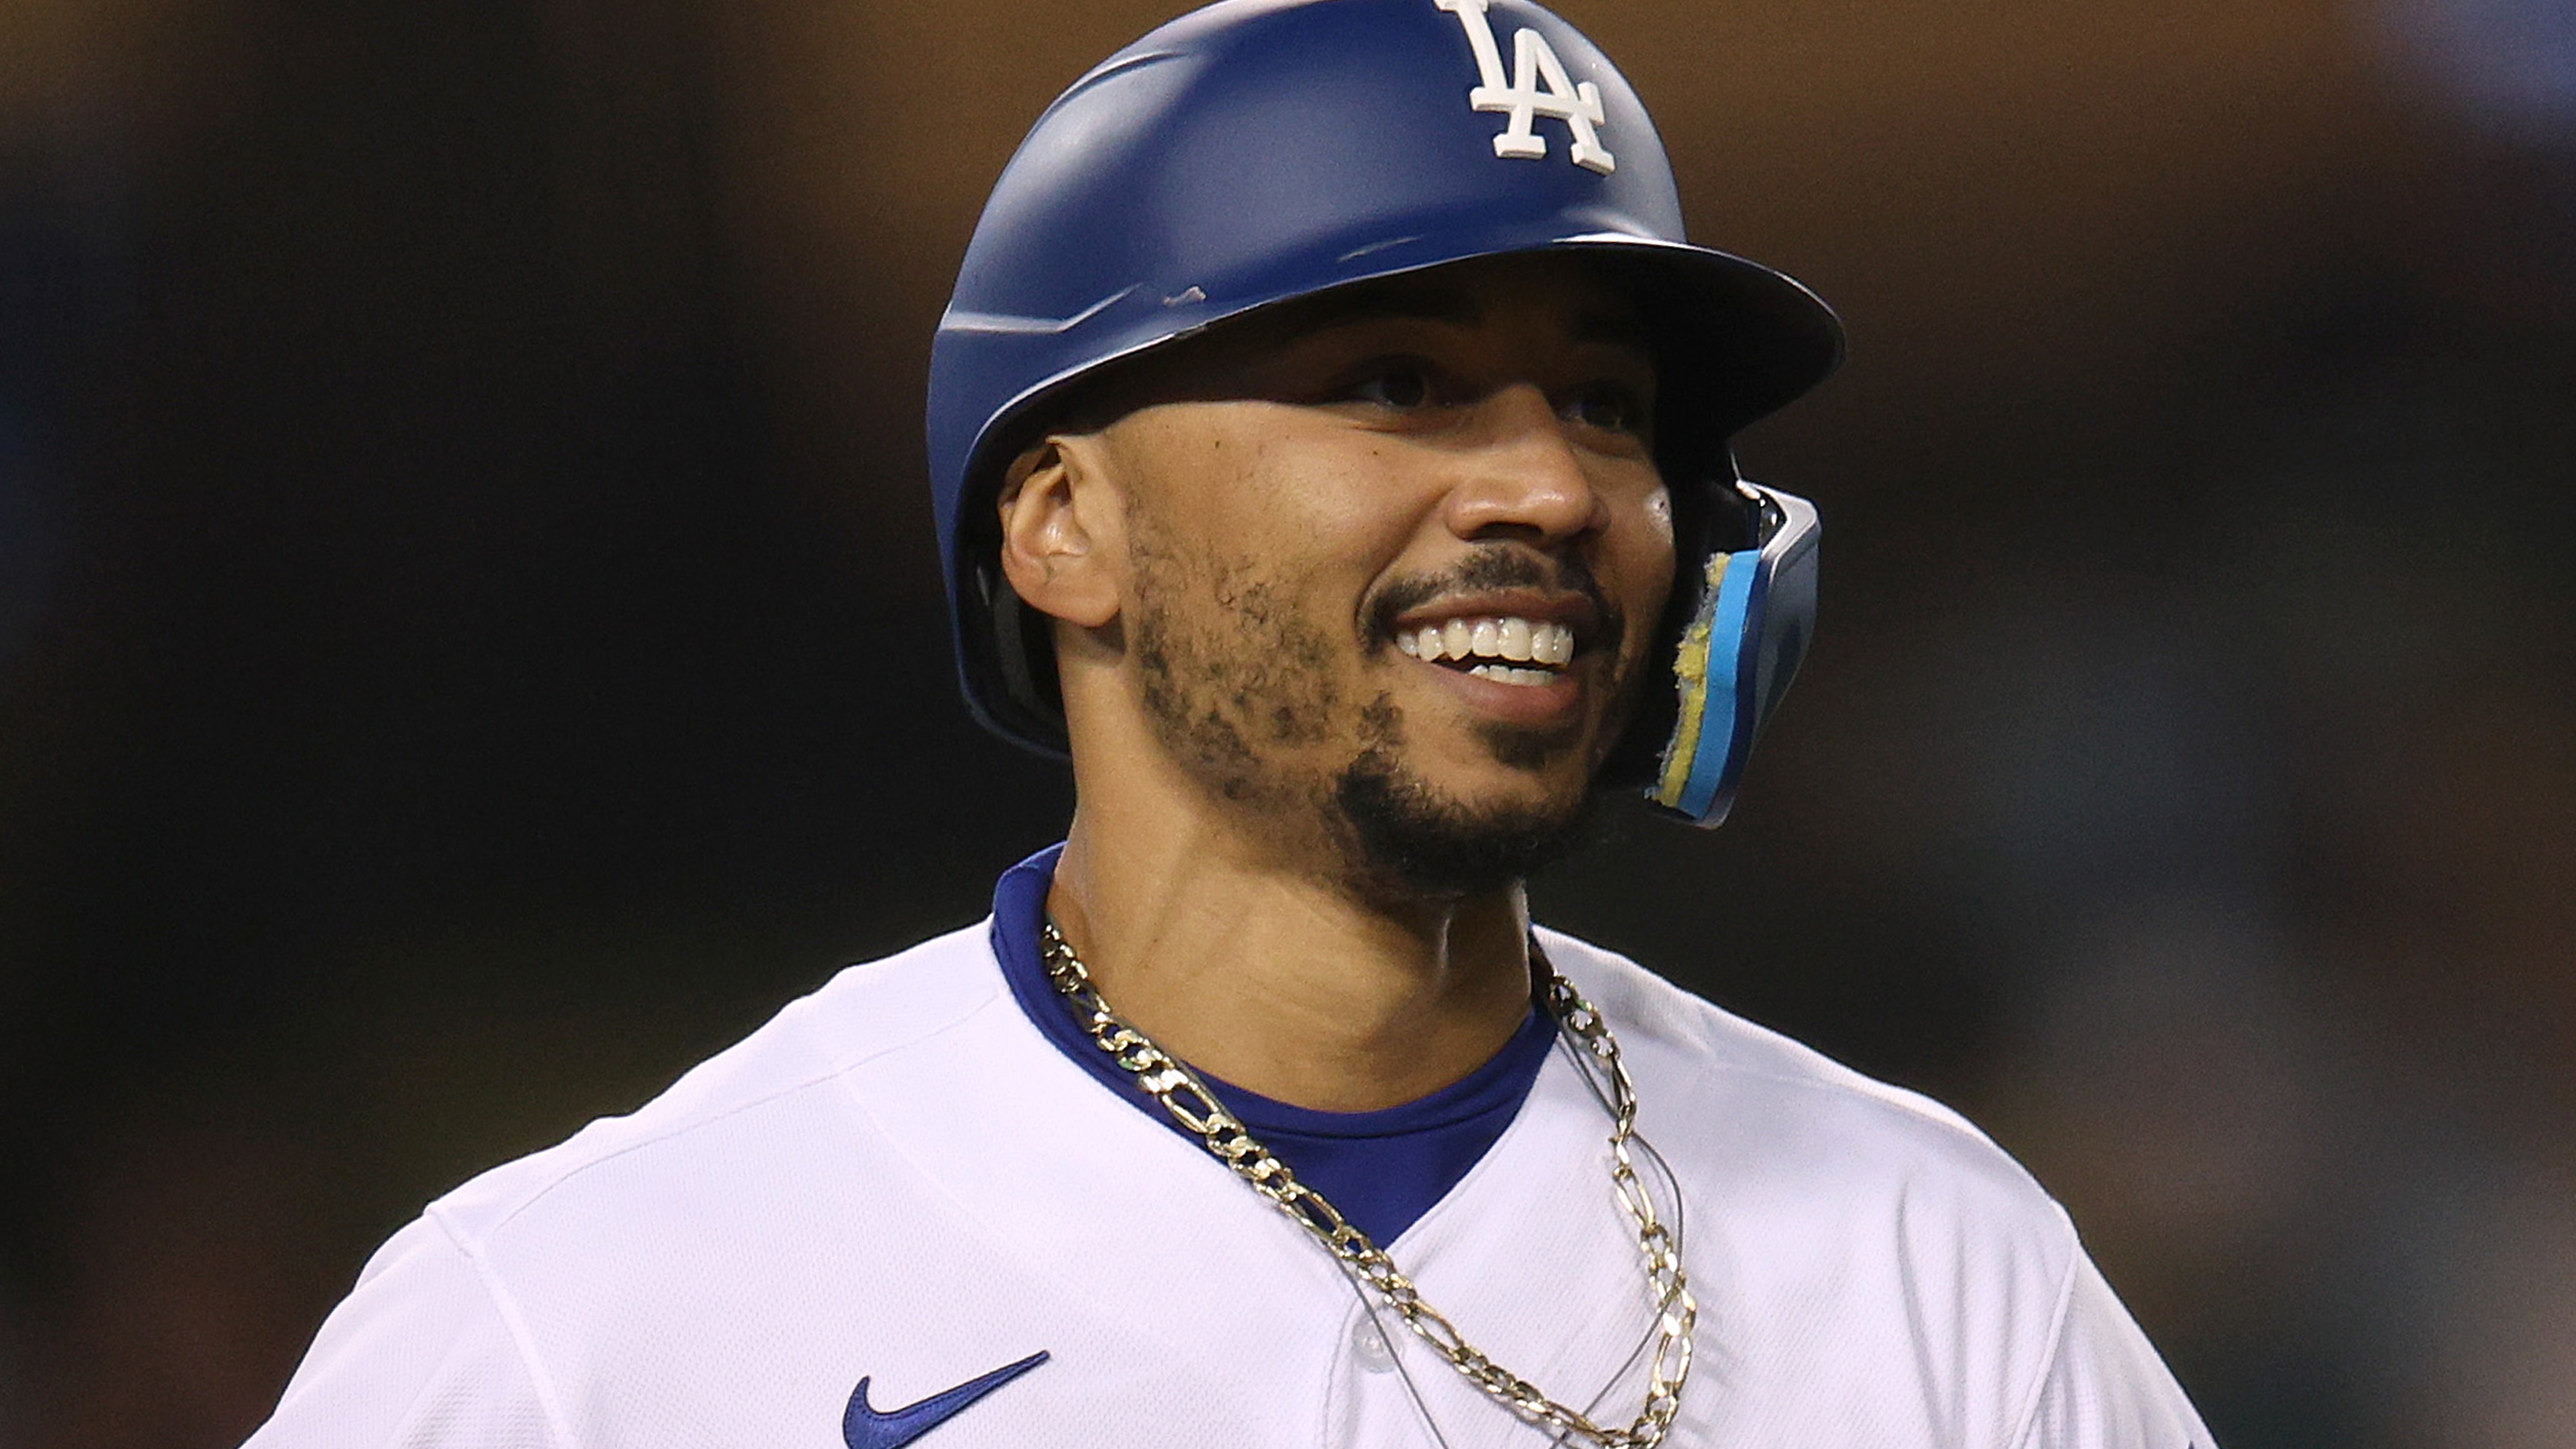 Dodgers' Mookie Betts Rents Airbnb to Avoid 'Haunted' Milwaukee